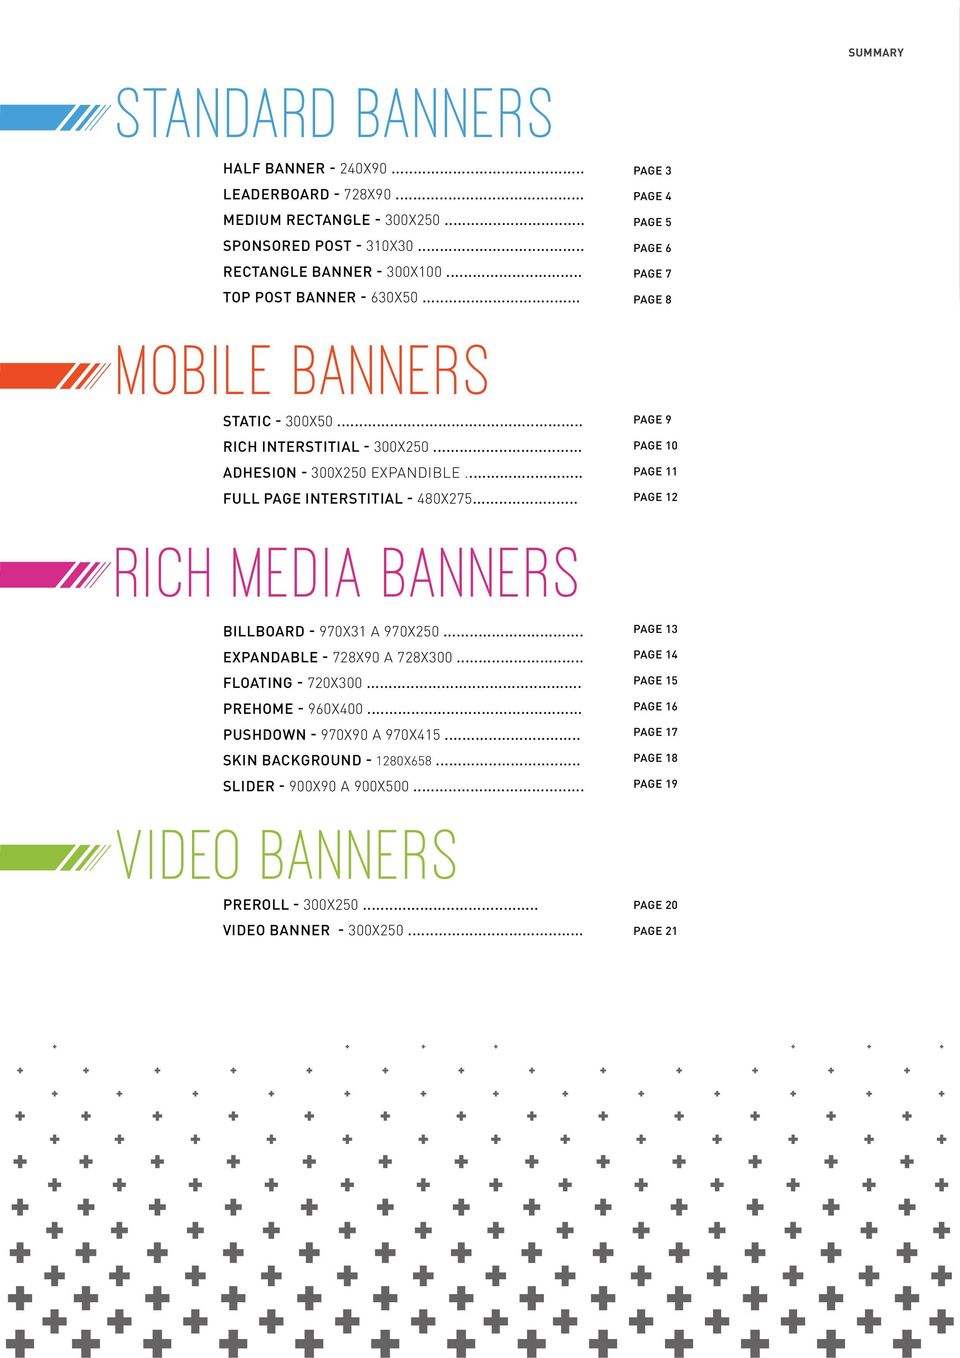 .. page 9 page 10 page 11 page 12 RICH MEDIA BANNERS billboard - 970x31 a 970x250... EXPANDABLe - 728x90 a 728x300... FLOATING - 720X300... PreHome - 960X400.